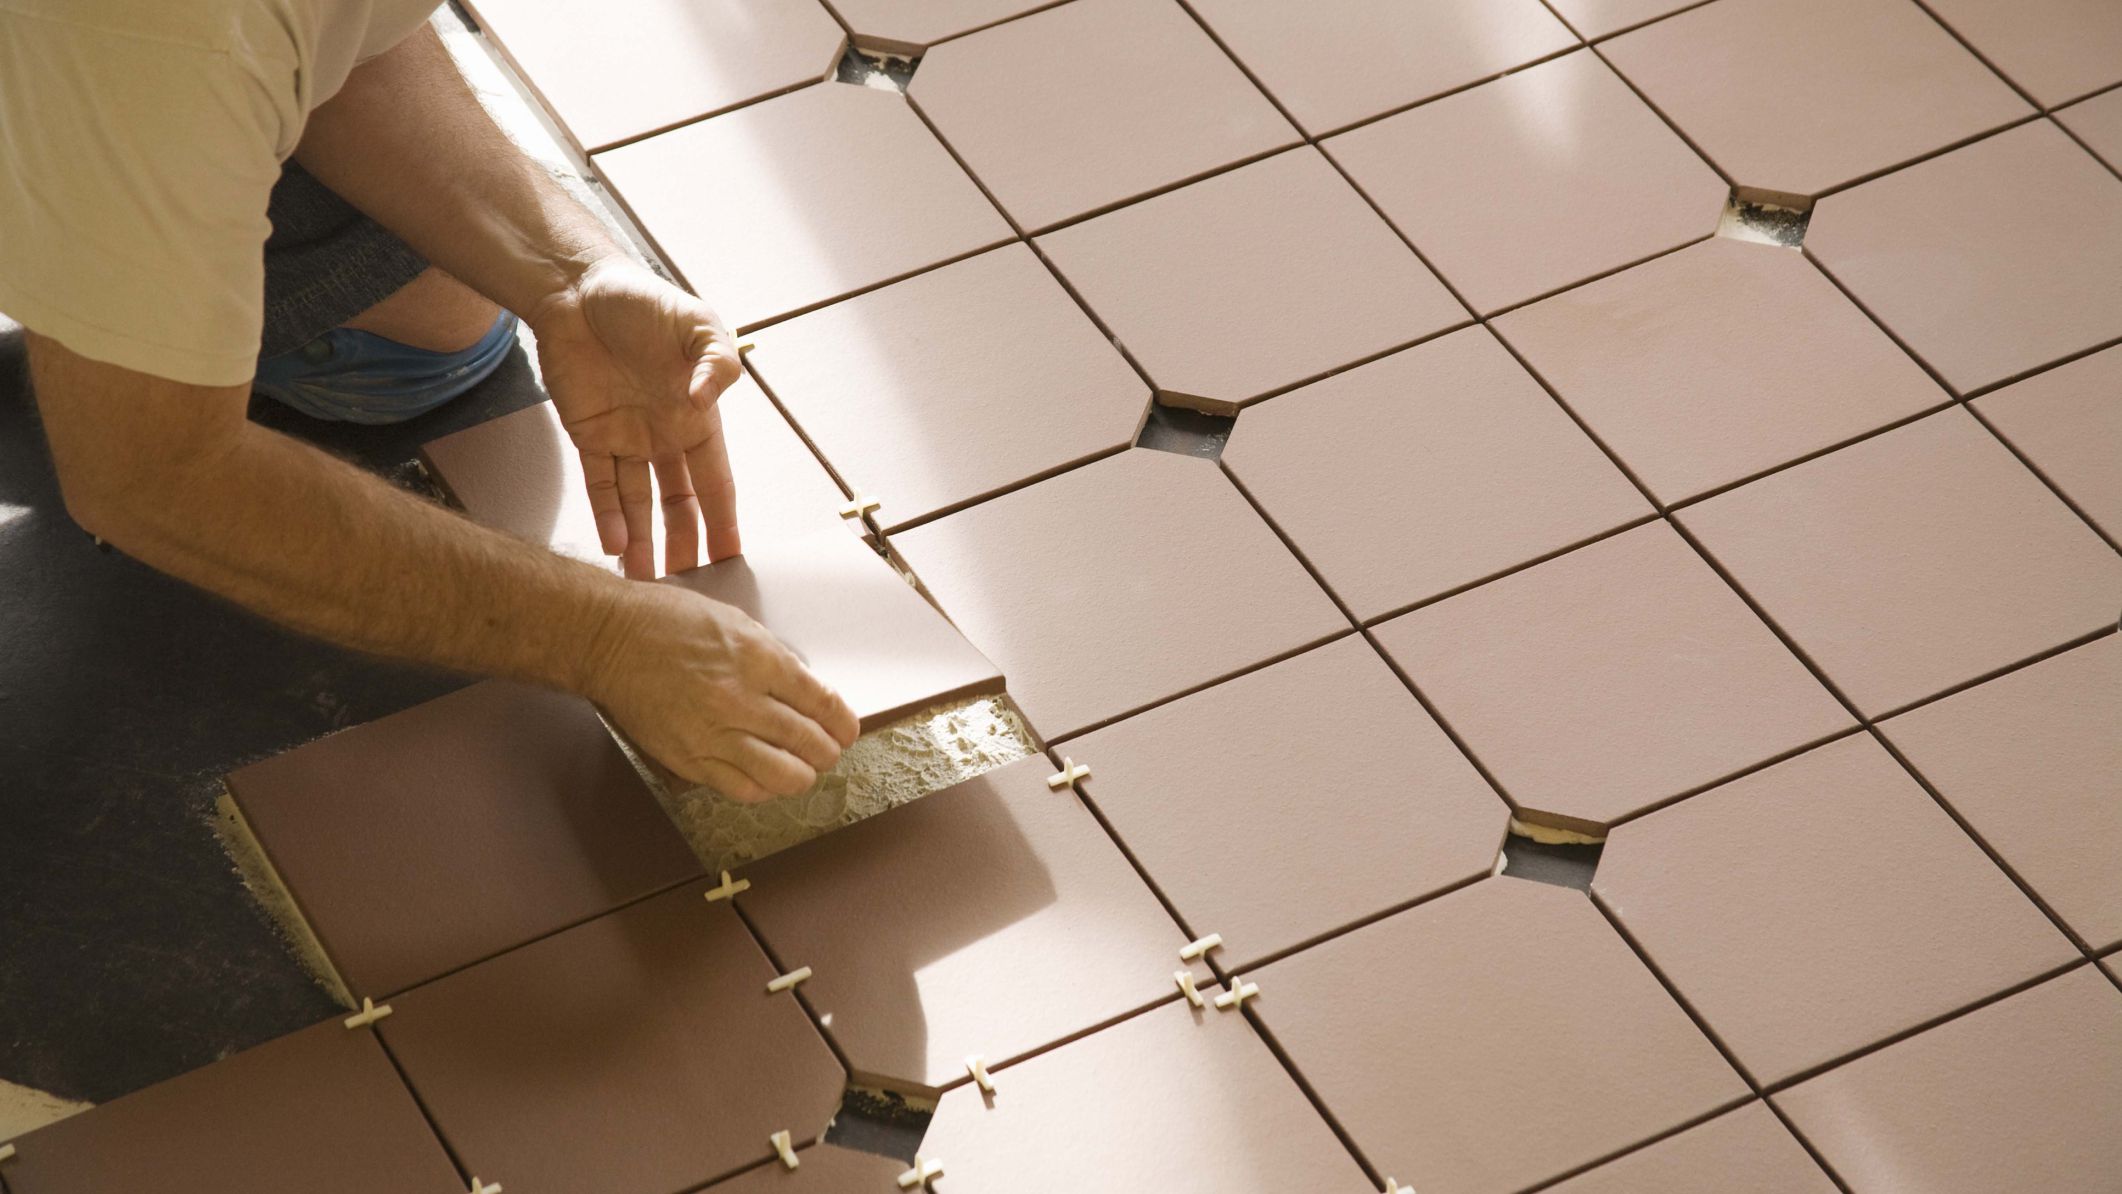 Find Your Options For the Smartest Floor Tiles